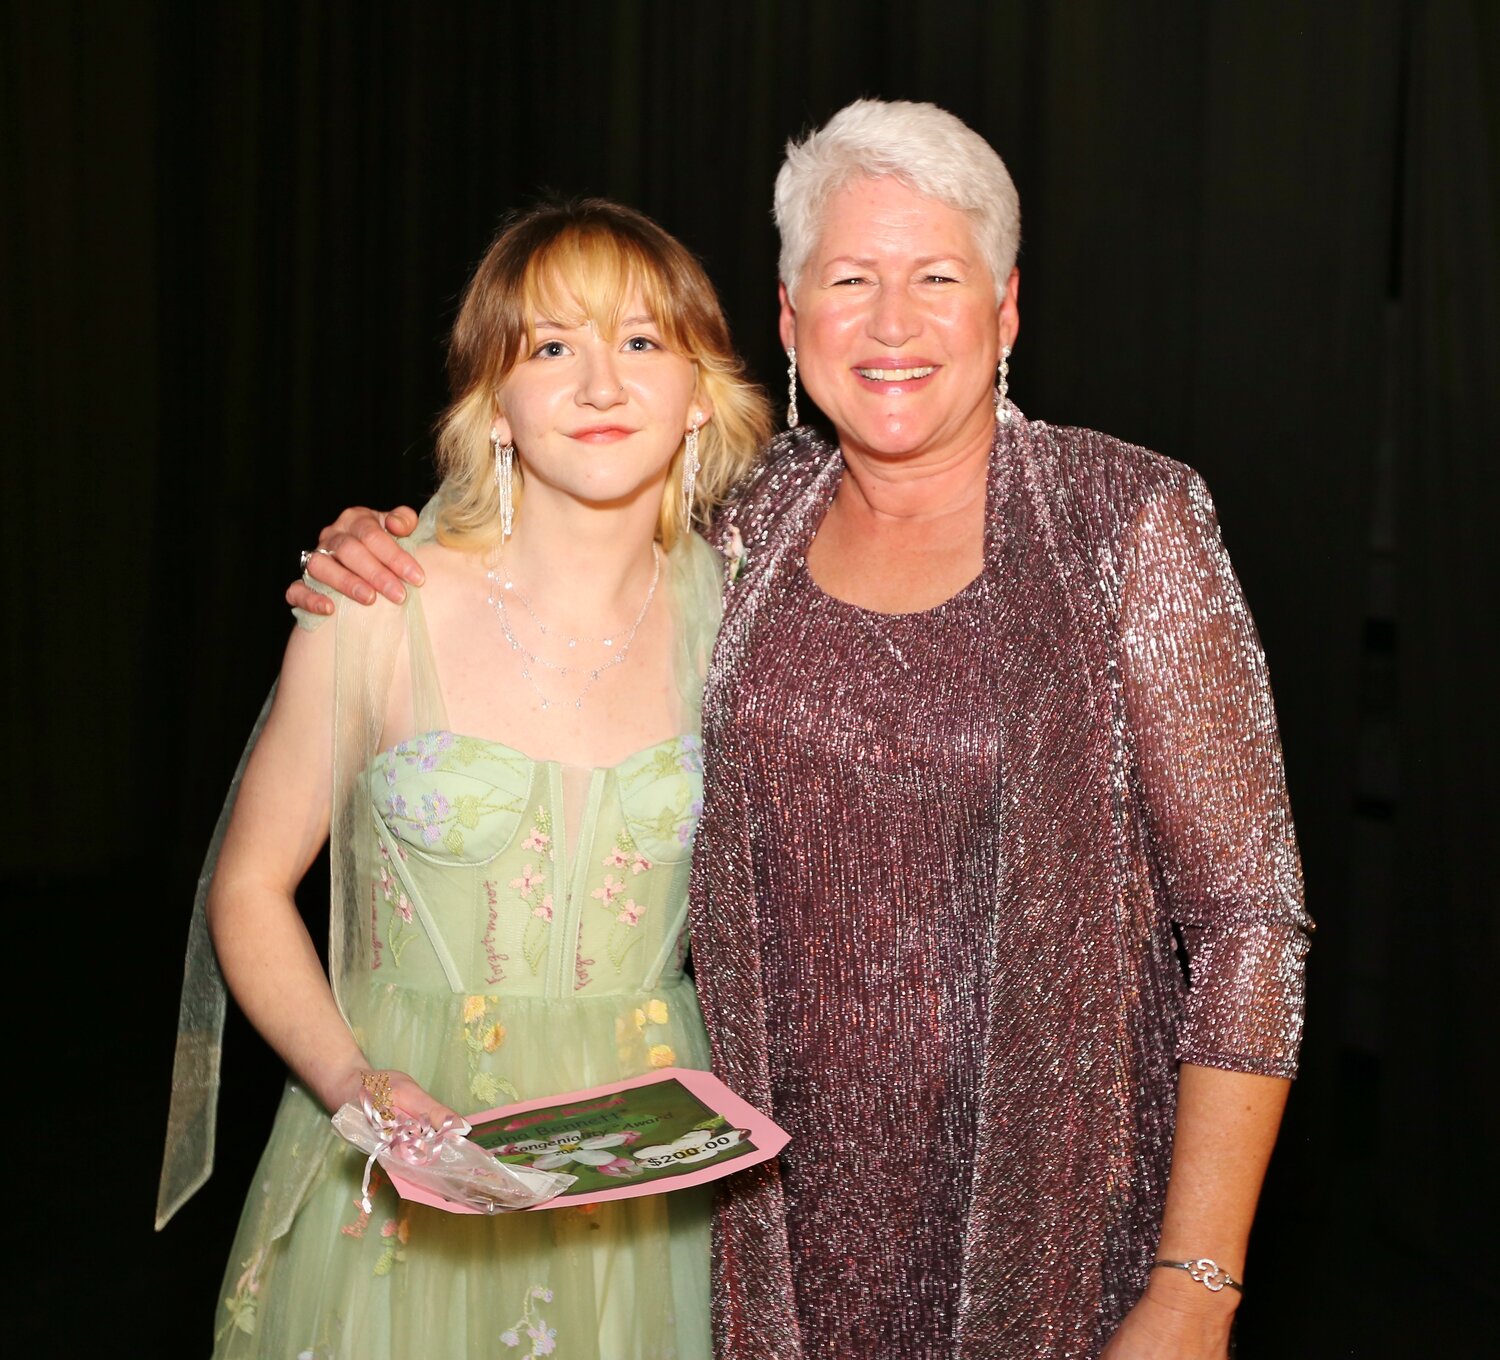 Queen Isabelle Harris was awarded the Edna Bennett Congeniality Scholarship. She is pictured with Susie Fox great-granddaughter of Edna Bennett.